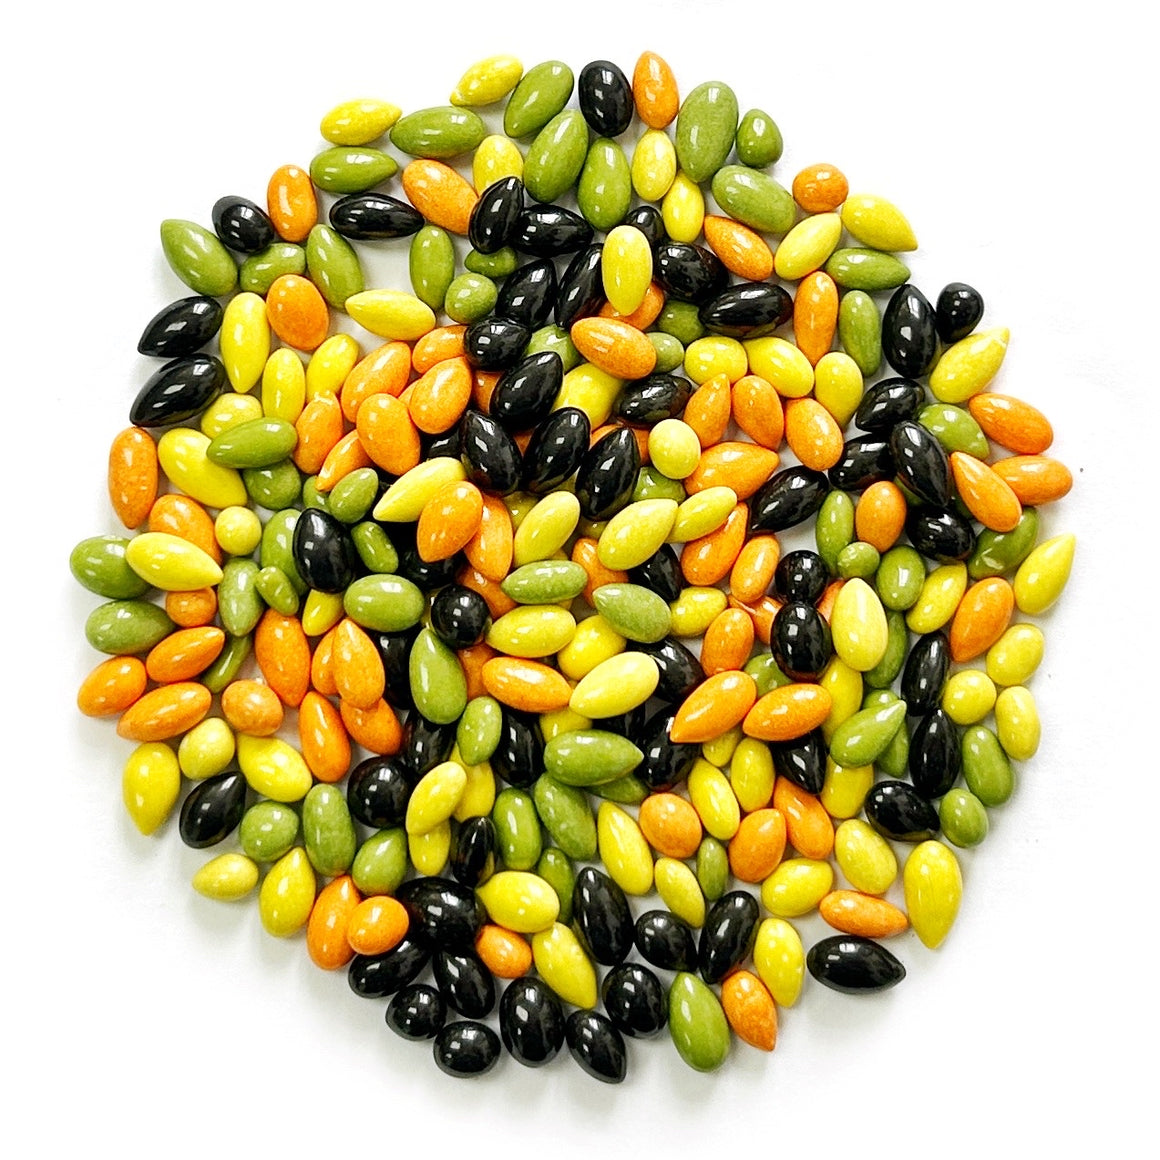 A colorful mix of Sunflower Seeds Milk Chocolate beans on a white background.